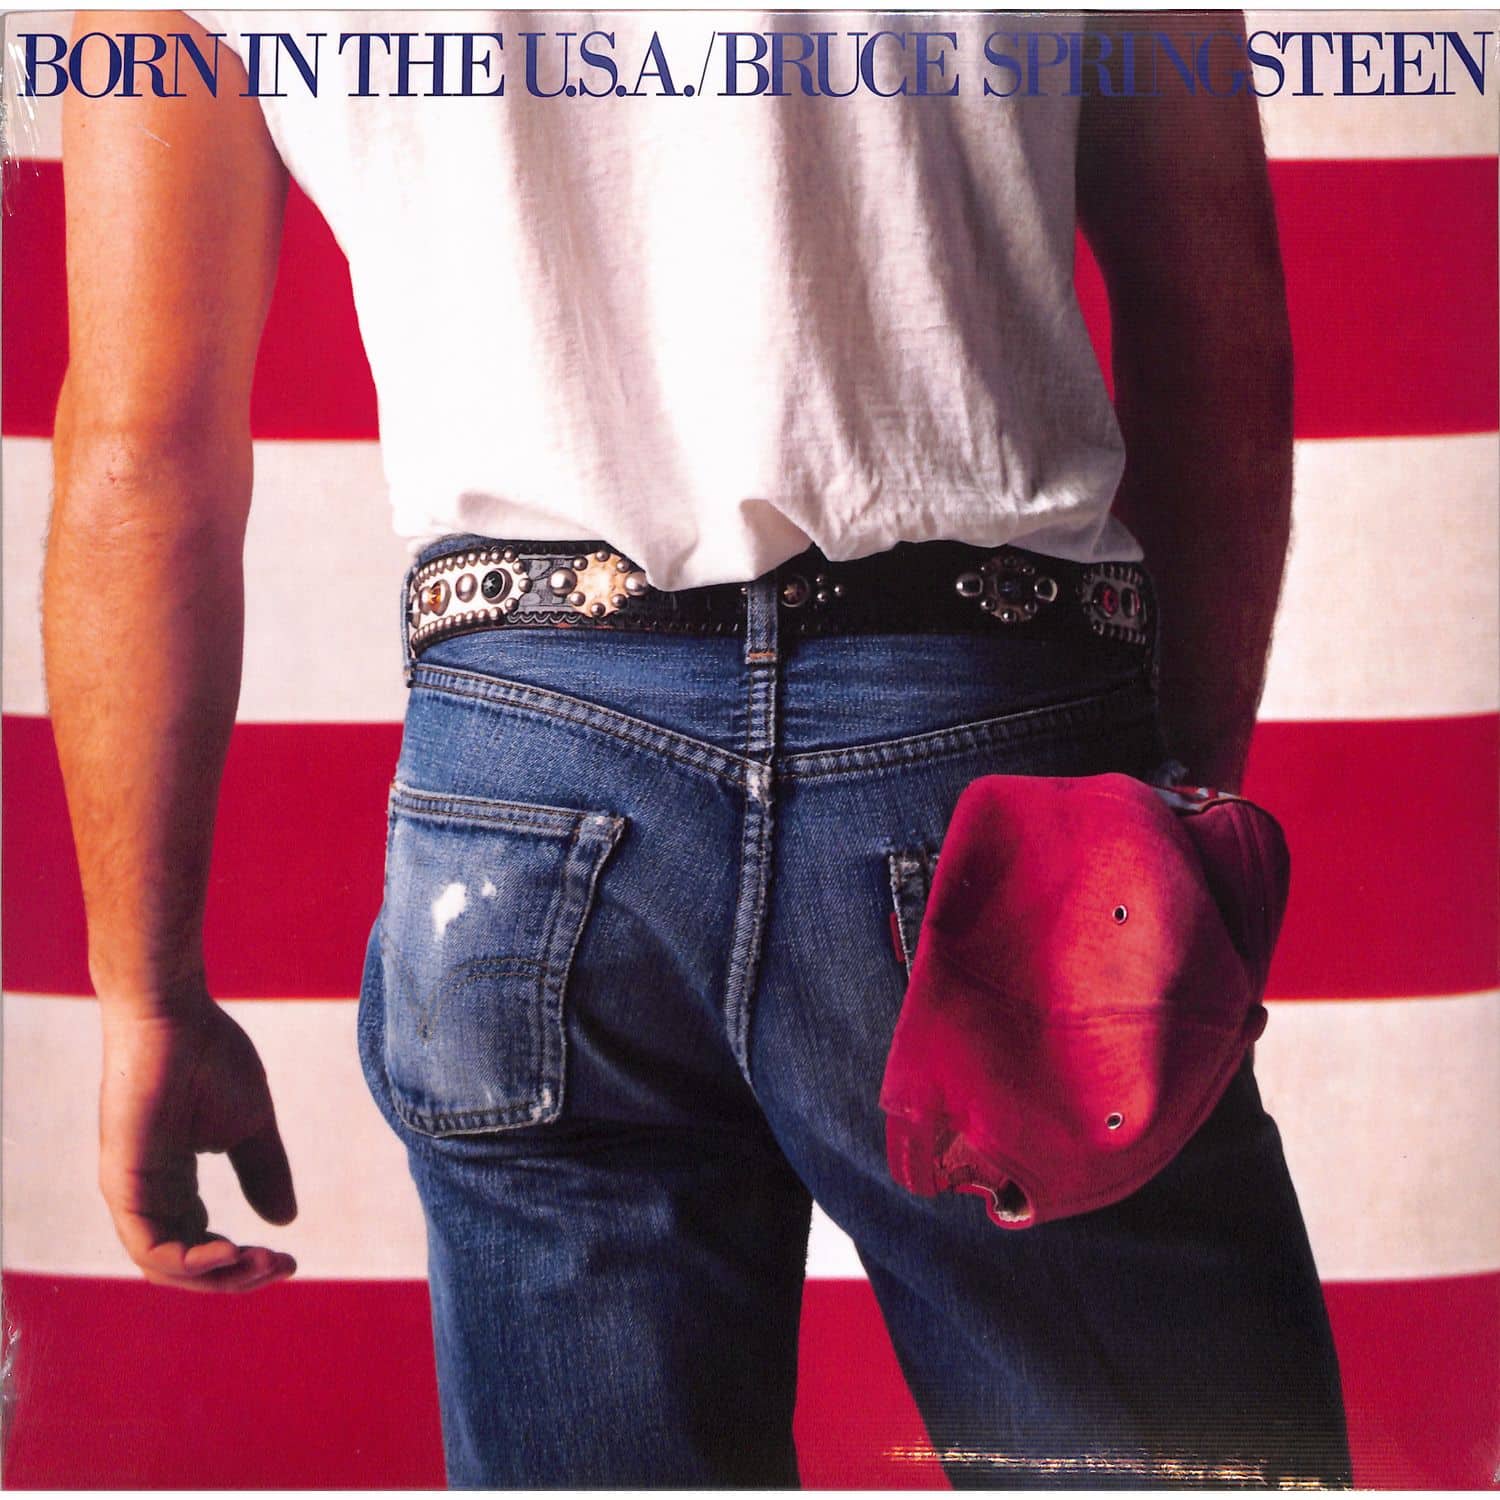 Bruce Springsteen - BORN IN THE U.S.A. 